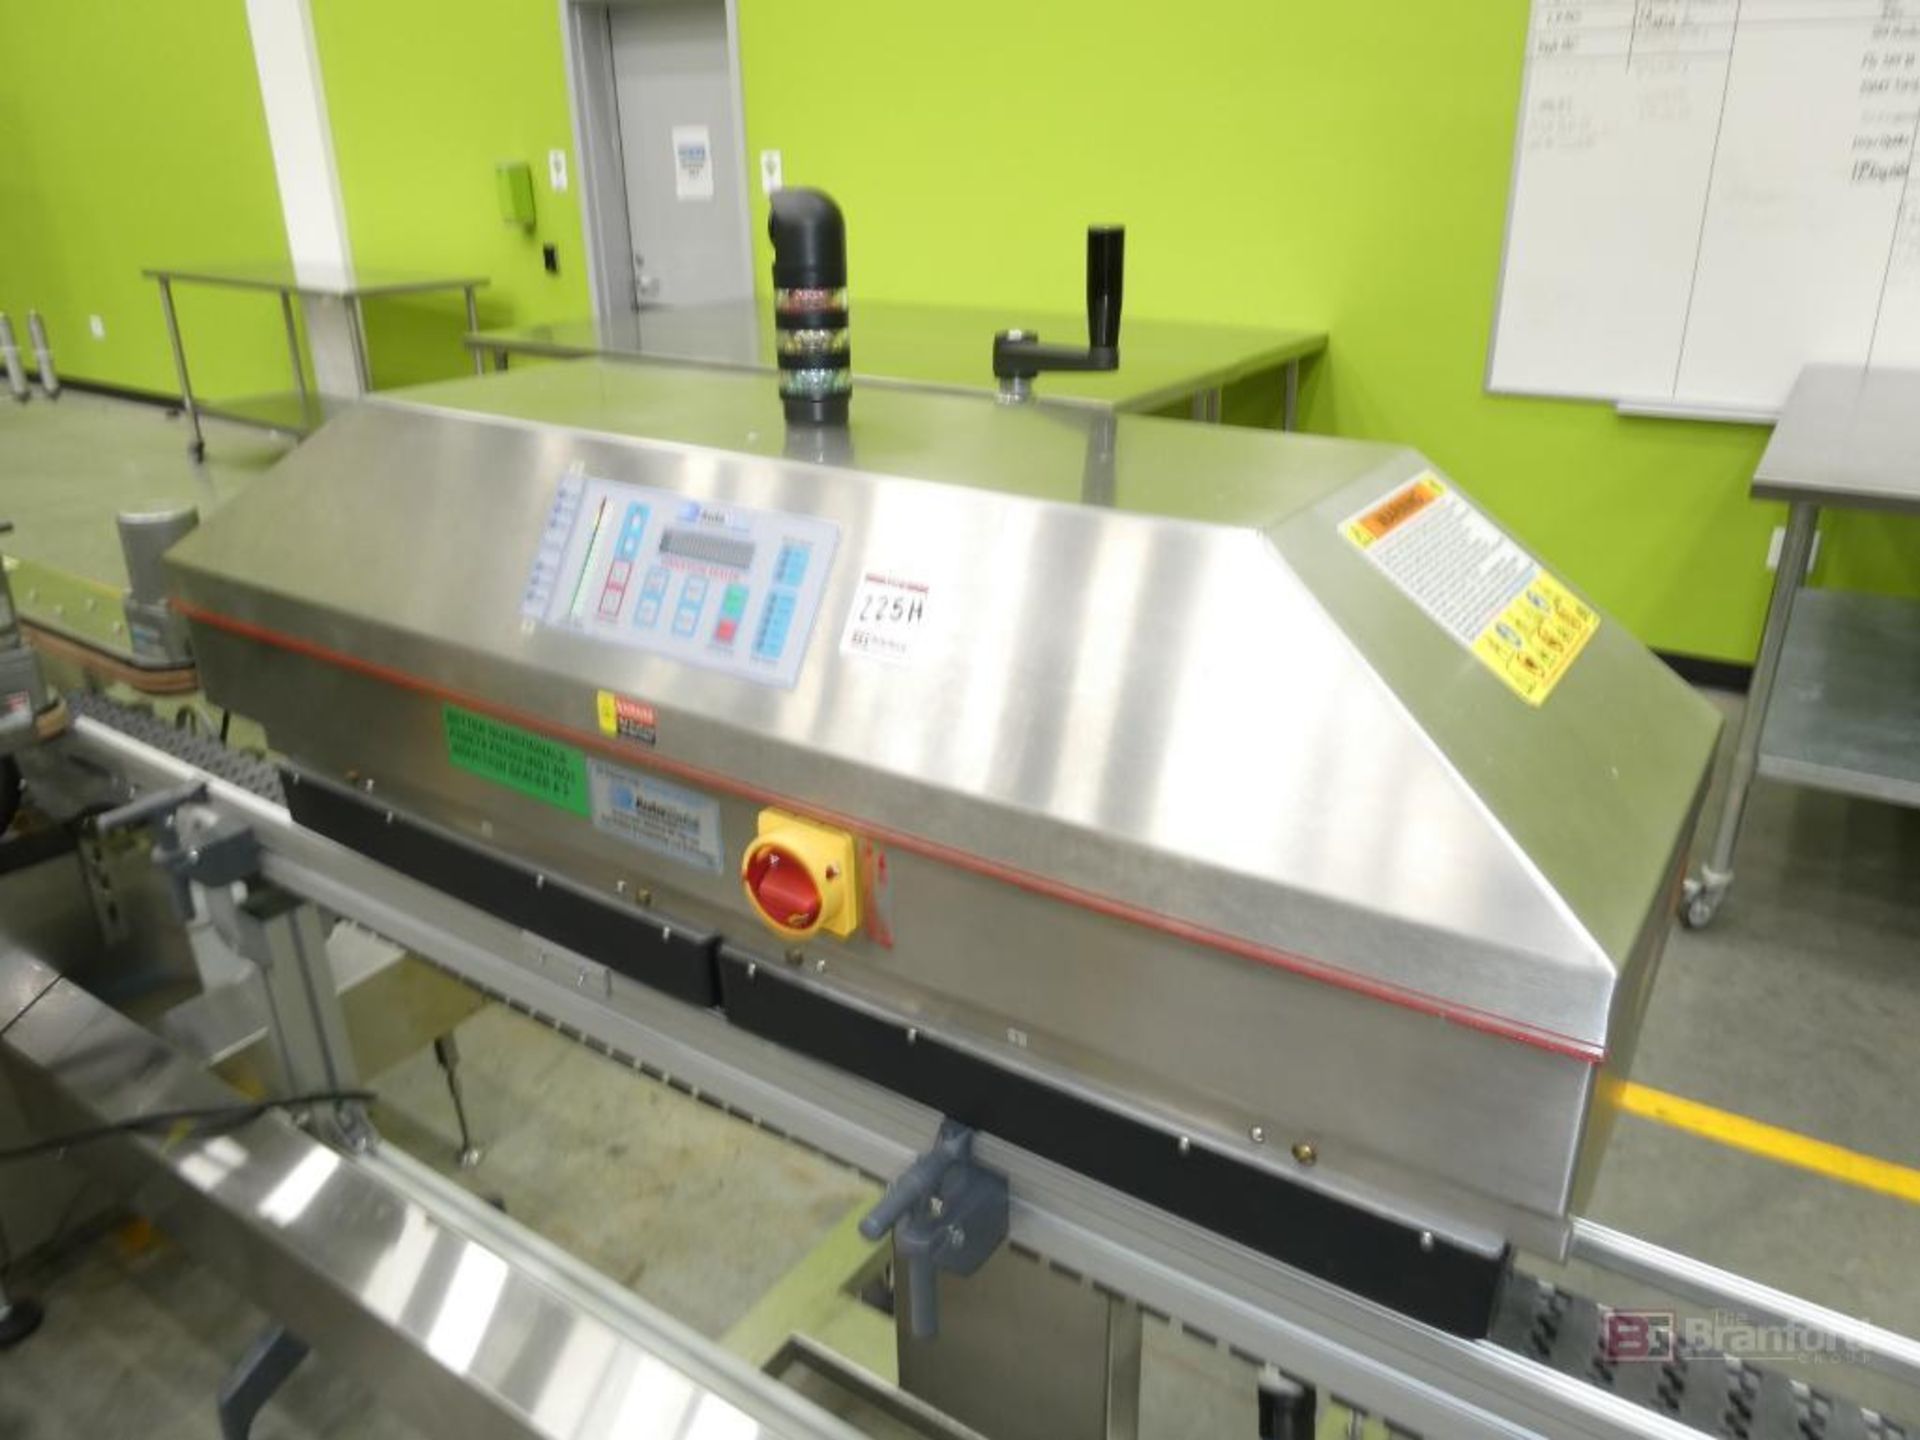 AutoMate Model AM-500, Stainless Steel High Speed Induction Sealer - Image 2 of 4